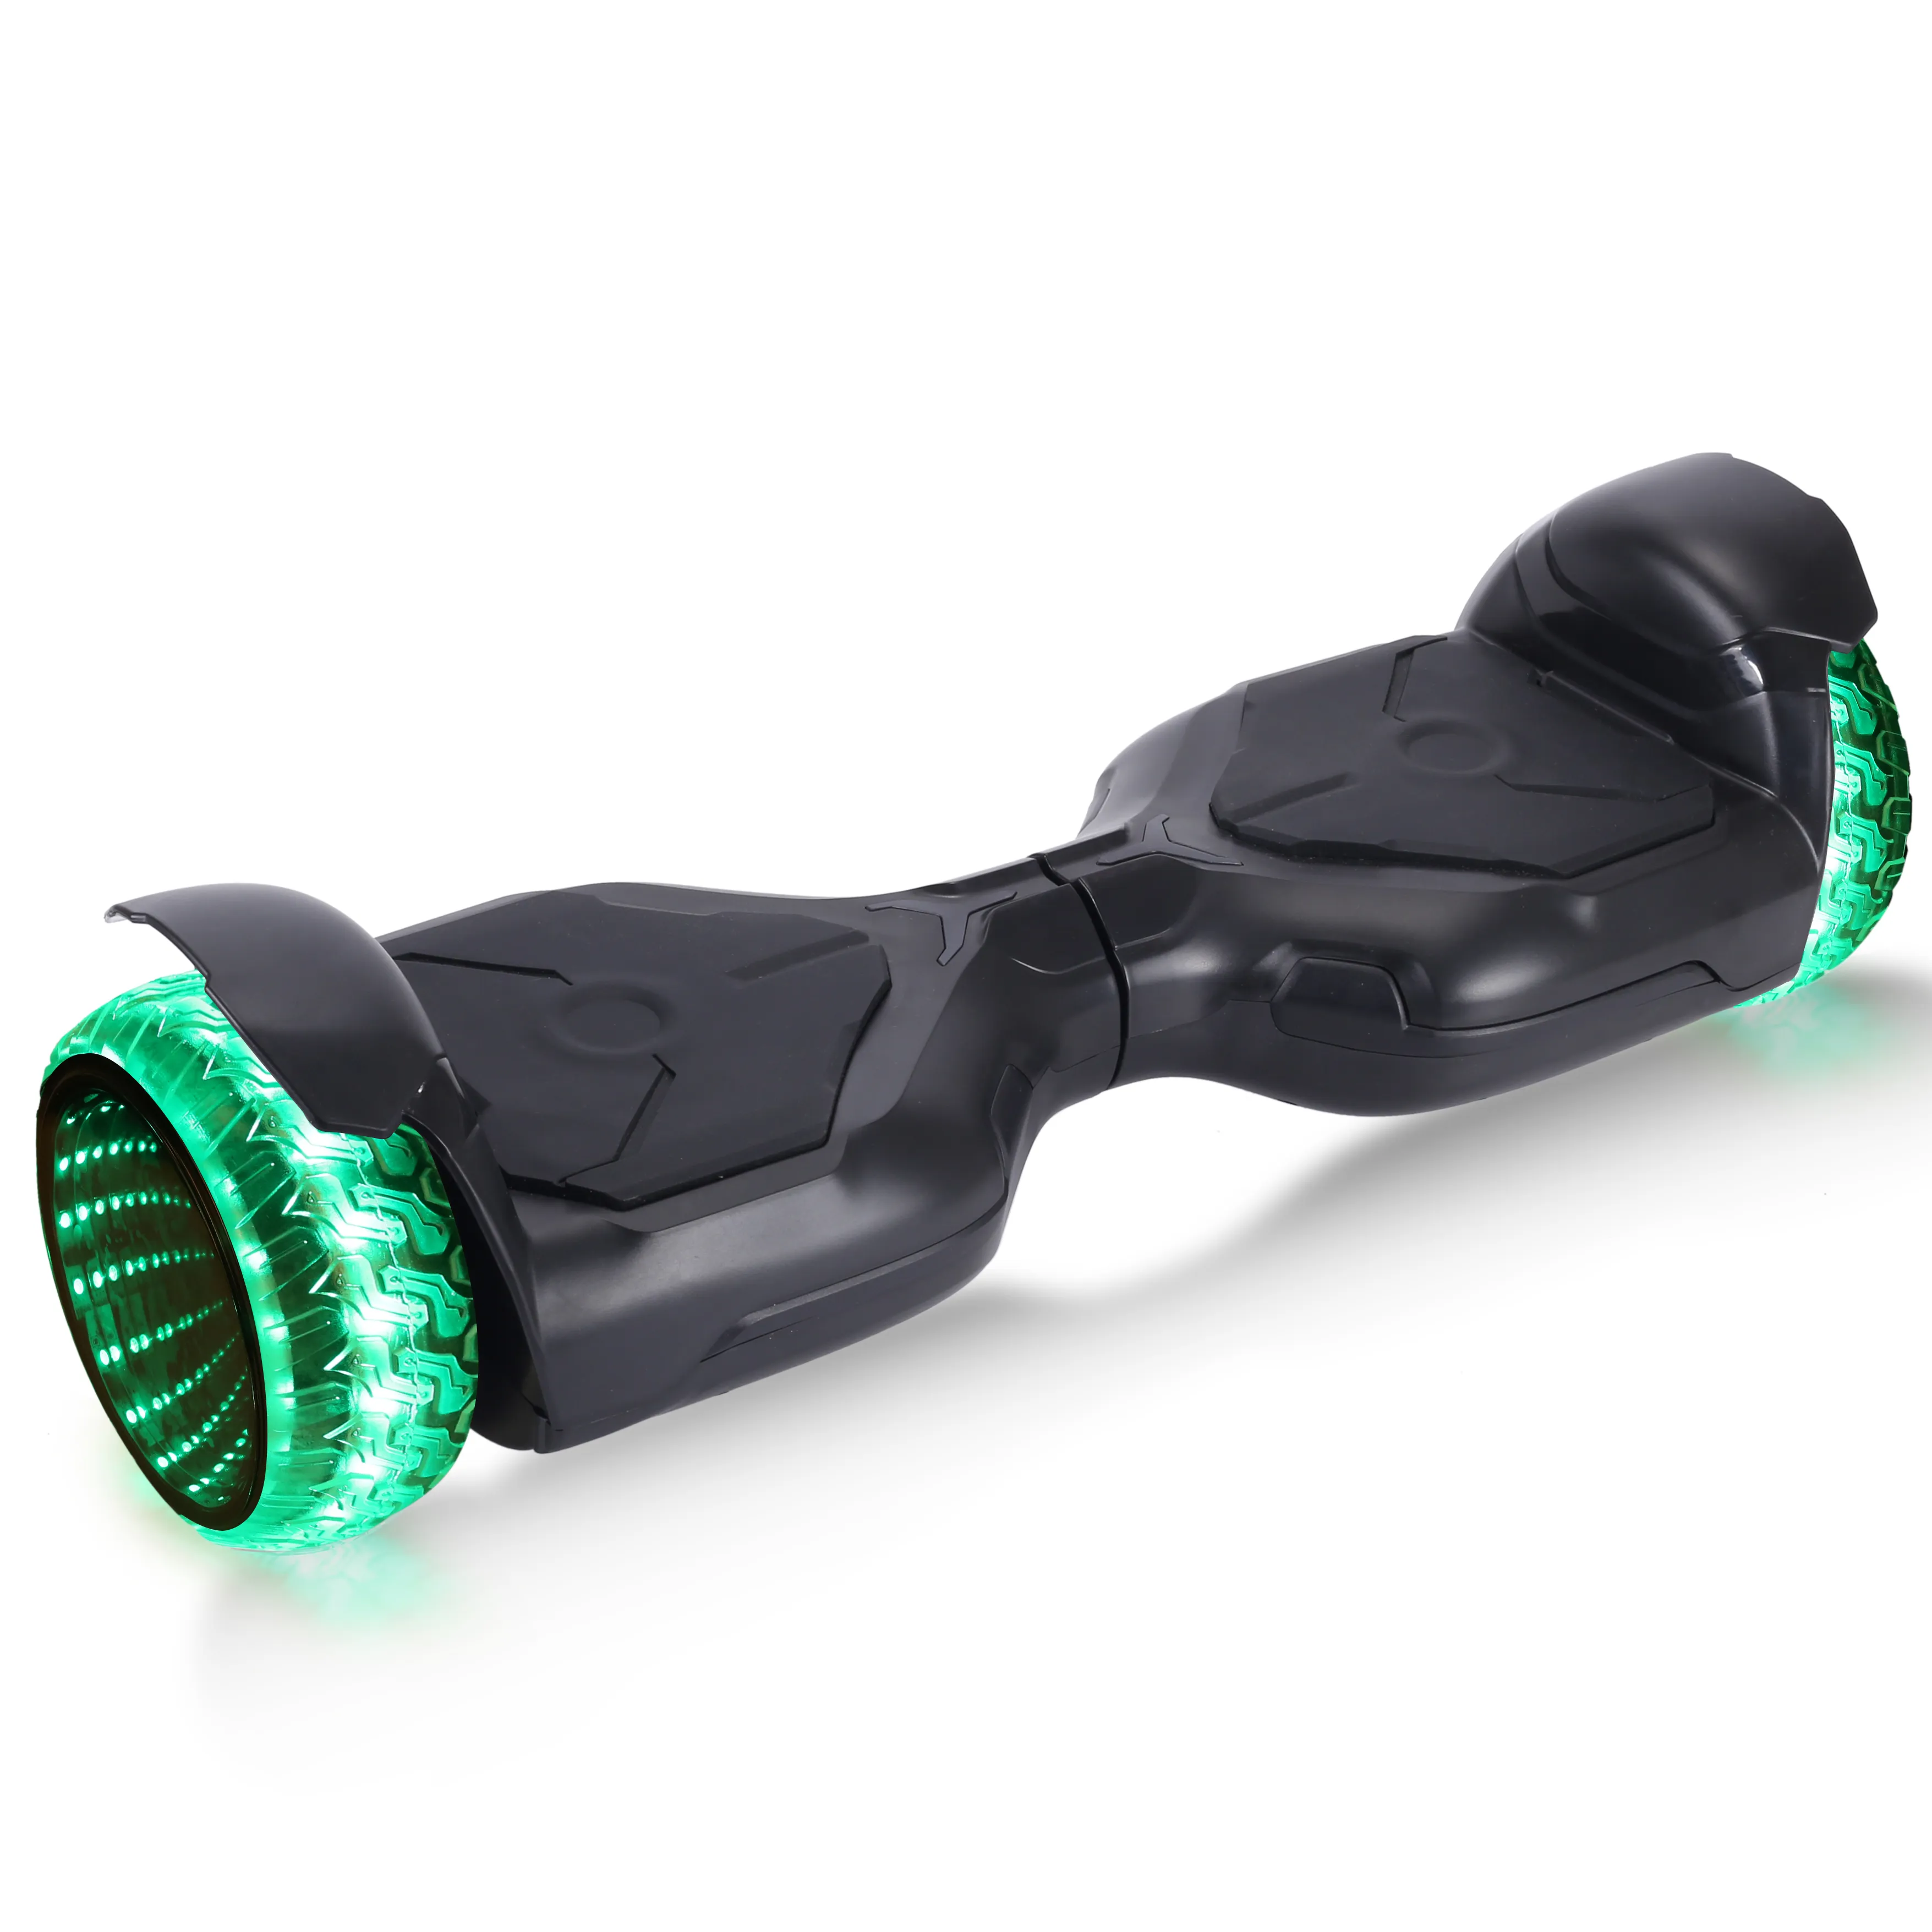 6.5 inch tire overboard 2 wheels self balancing electric scooter for adult and kid hover board